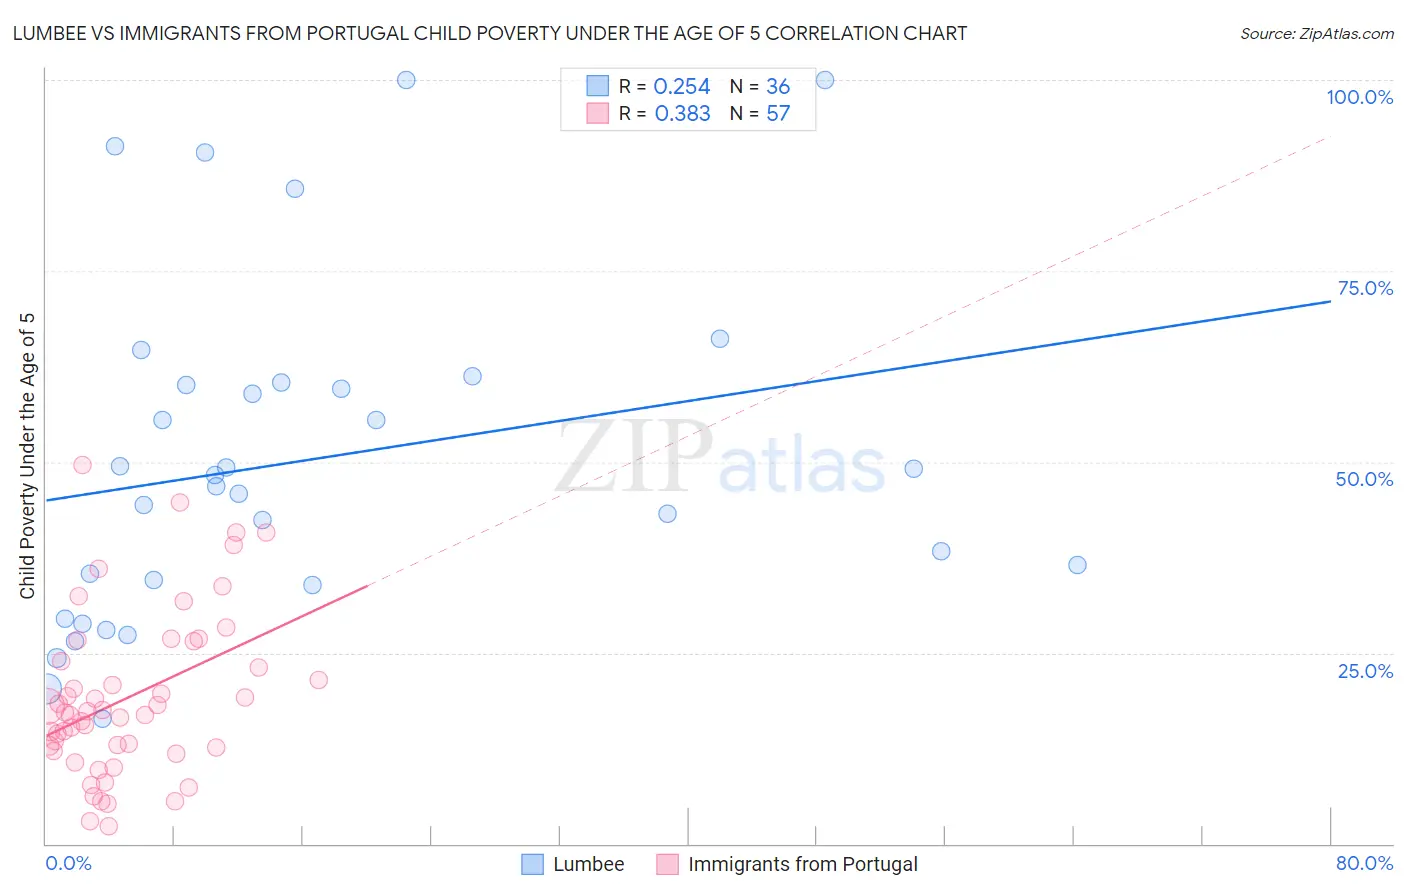 Lumbee vs Immigrants from Portugal Child Poverty Under the Age of 5